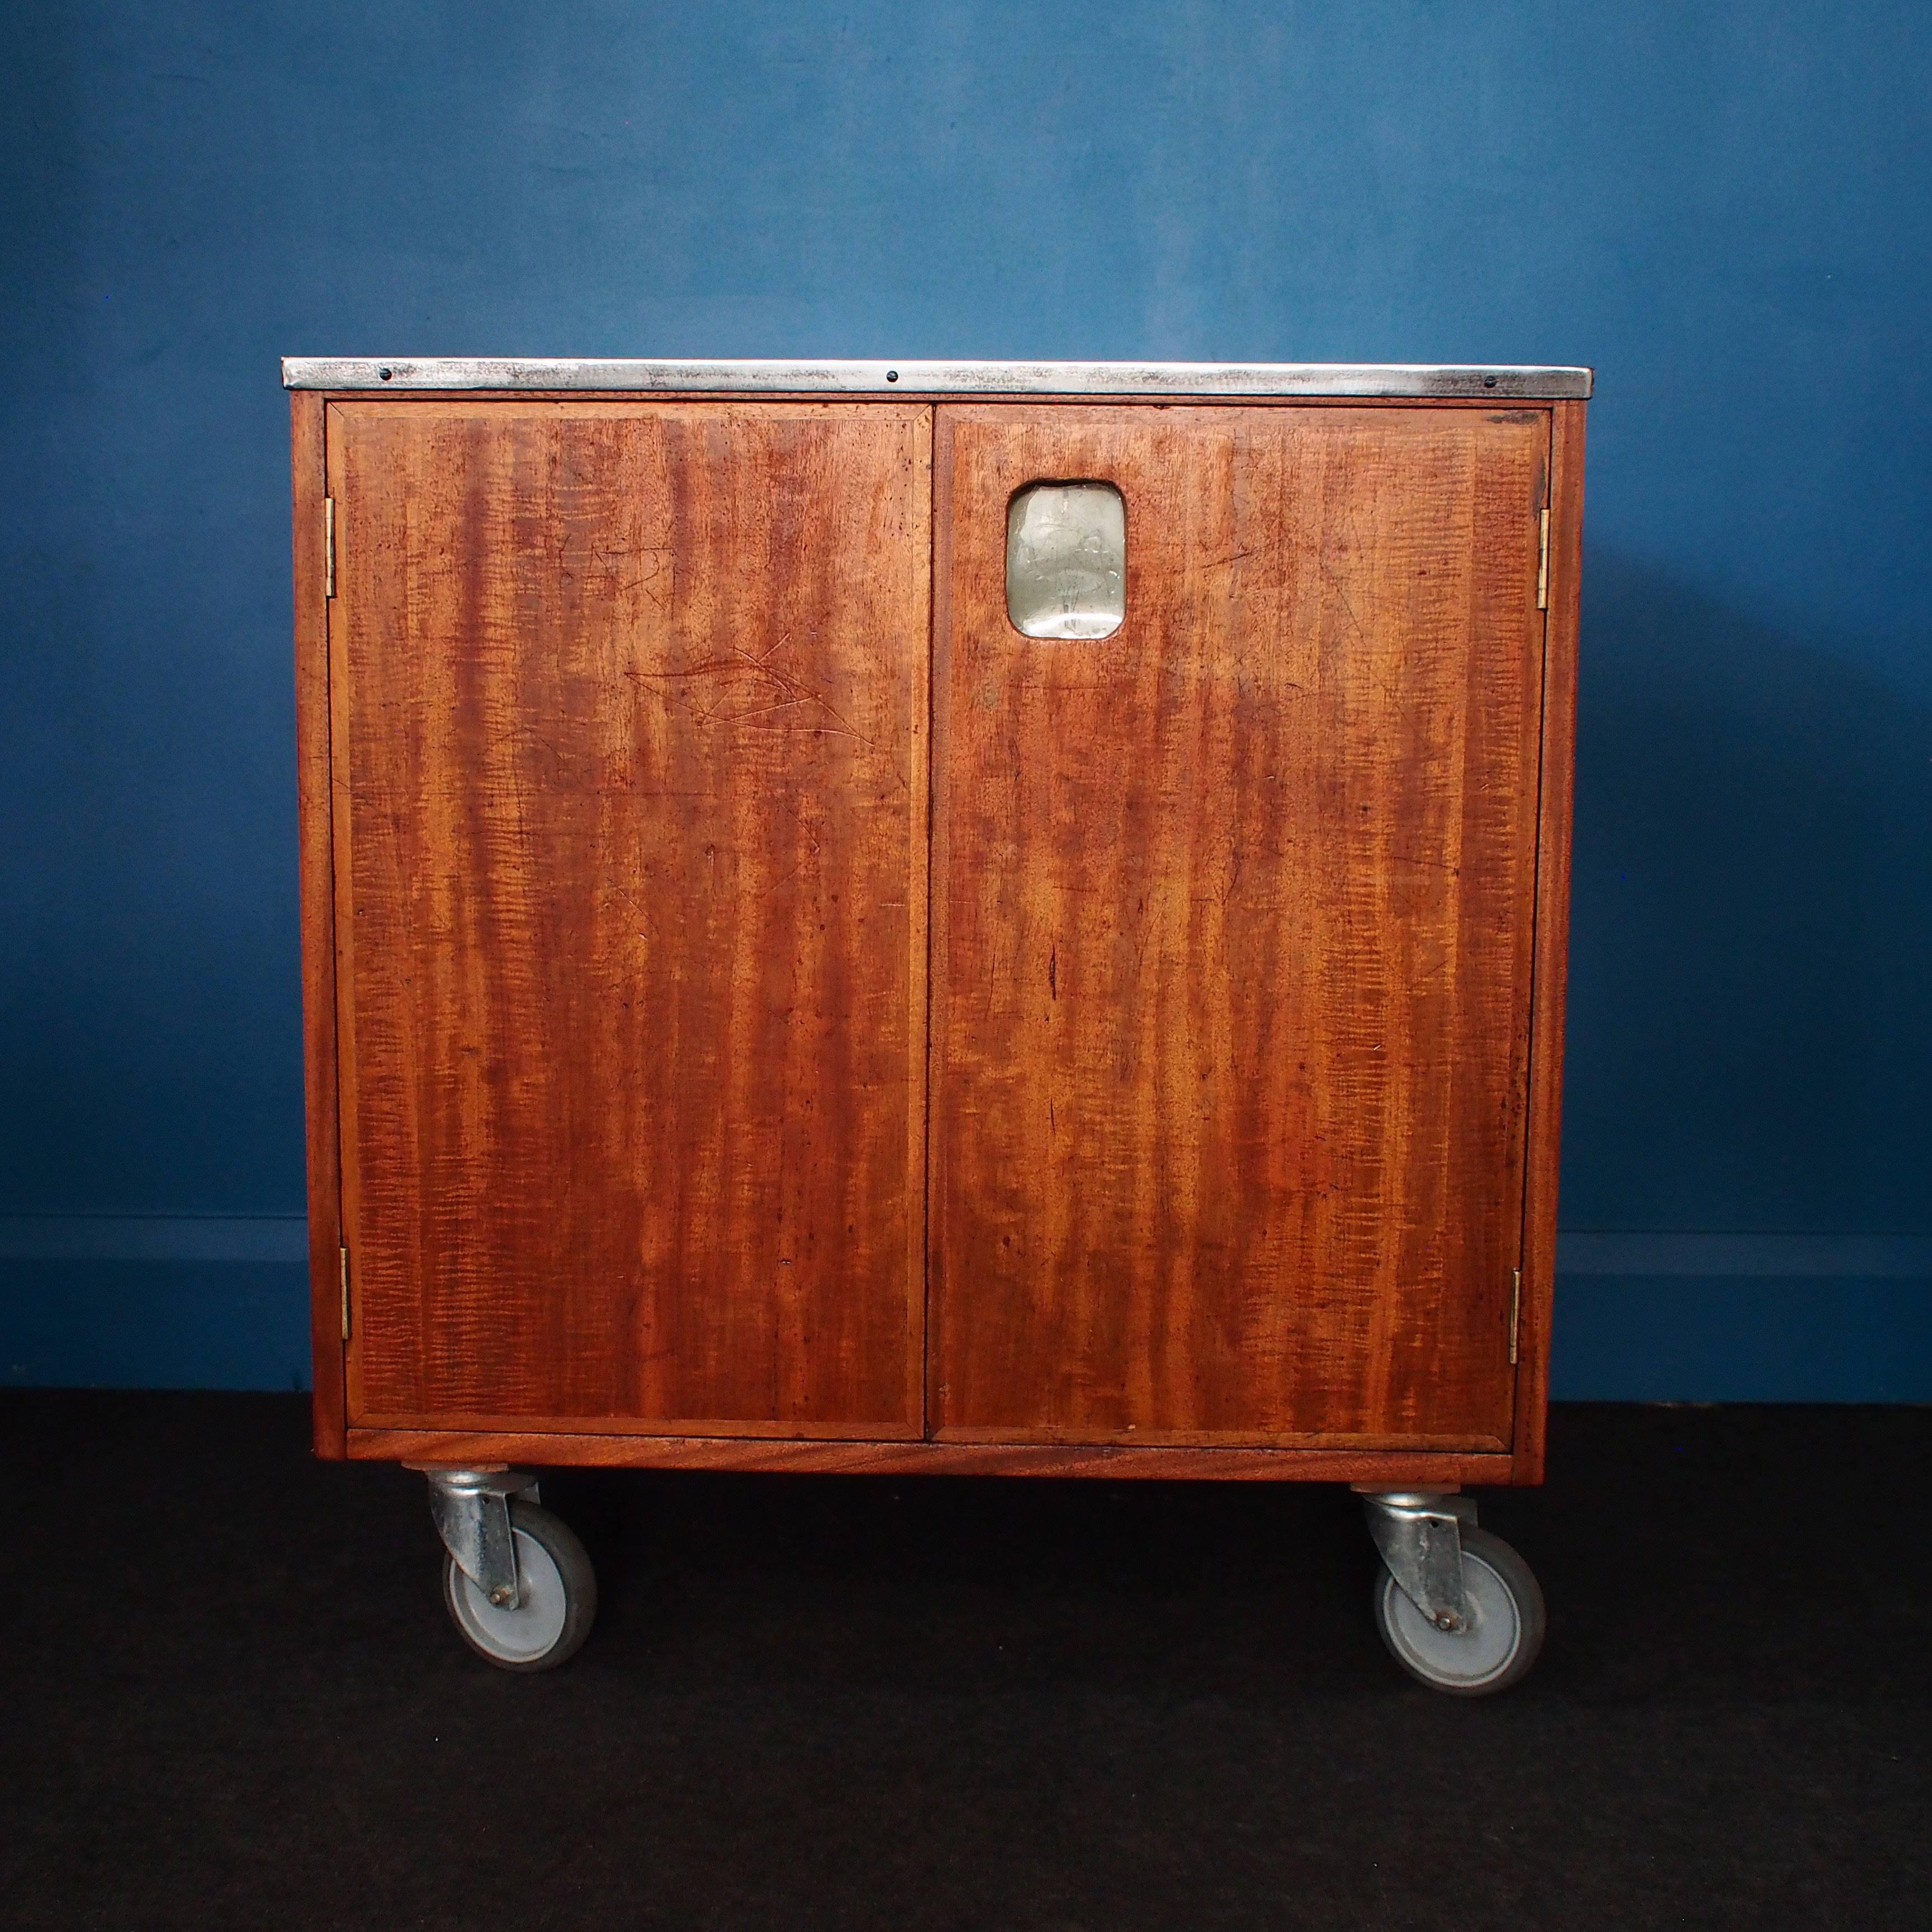 By Wrinch & Sons and dating back to 1955, this vintage Art School Unit is set on lockable casters and has nine dovetail-jointed drawers on one side and a Shelved cupboard with twin doors on the other side. Topped with a polished steel Worktop this